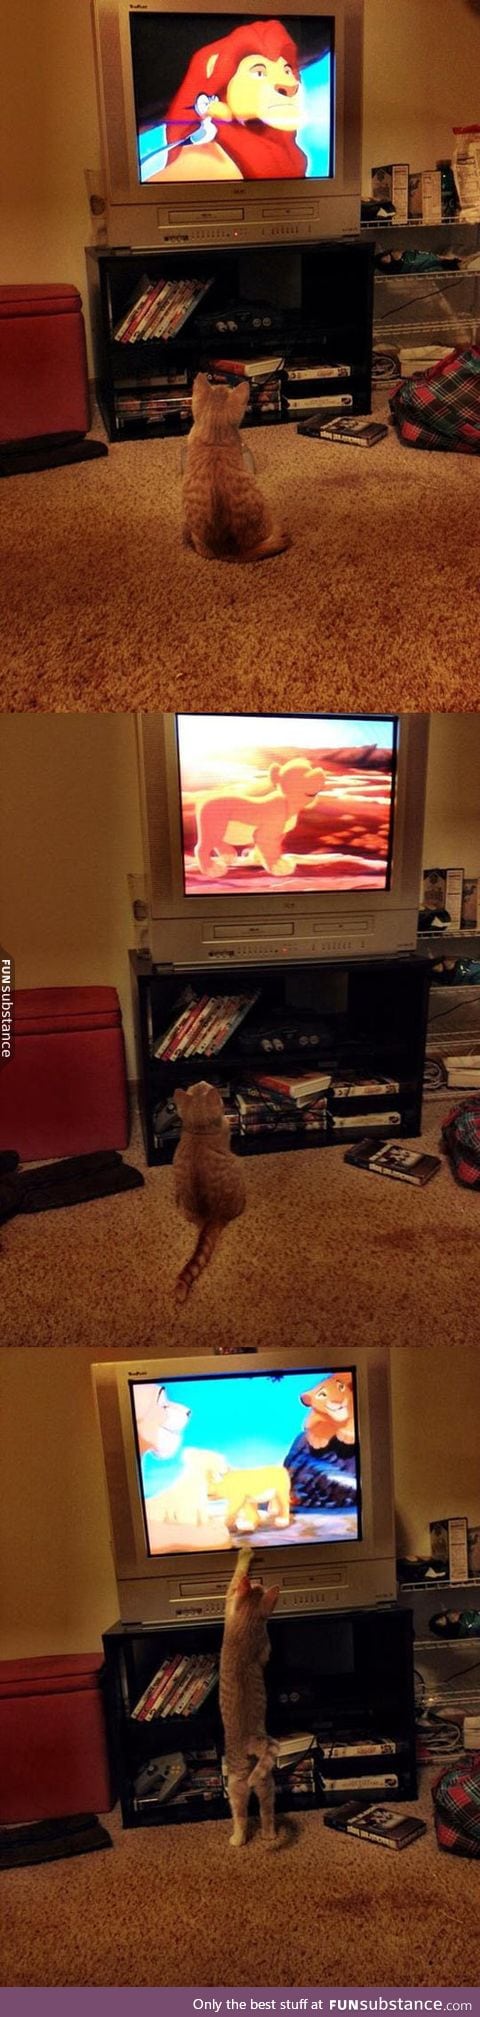 Watching the lion king